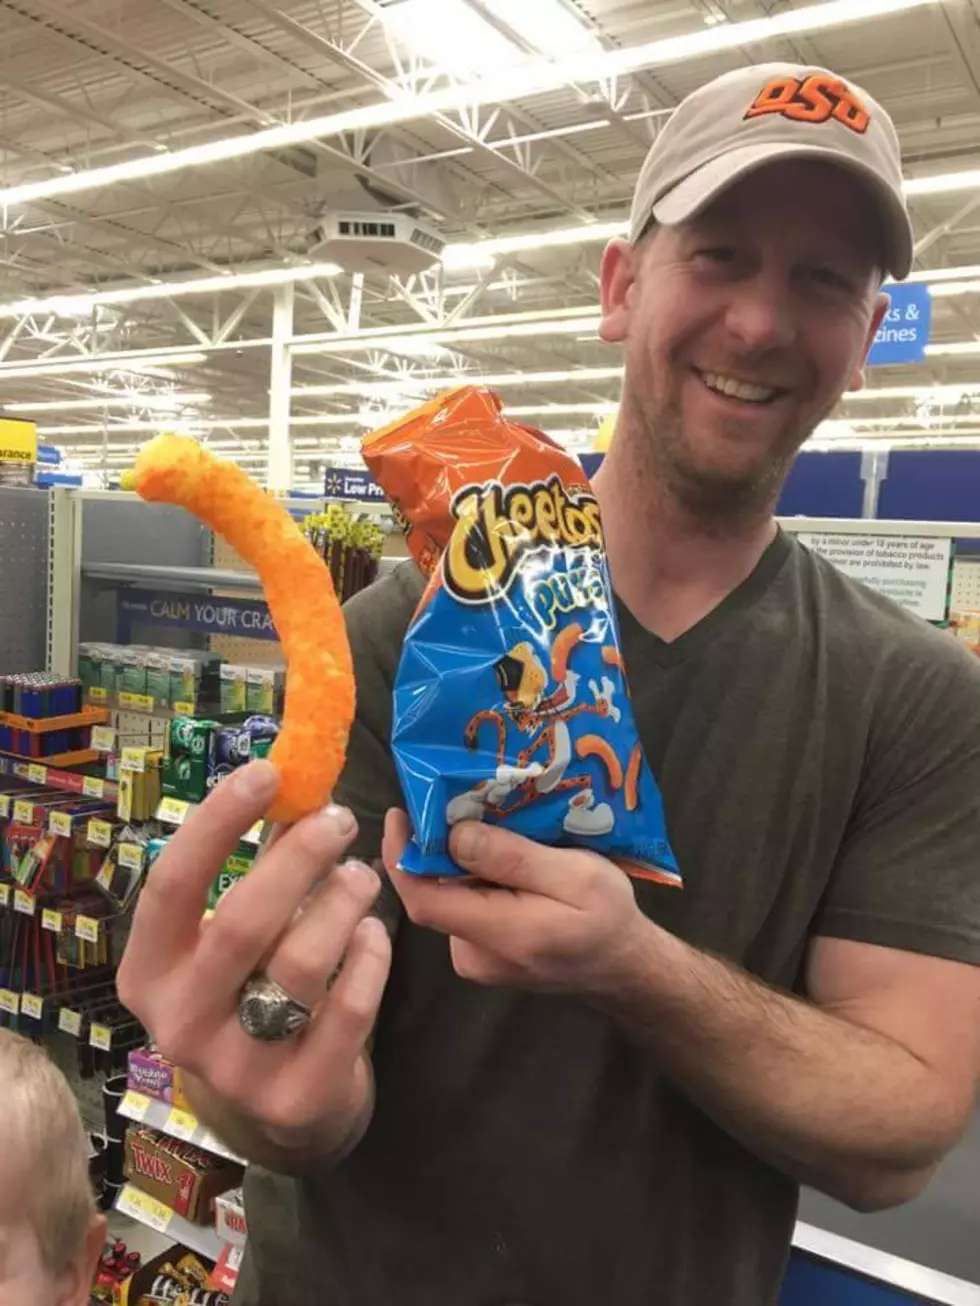 West Michigan Man Finds a GIANT Cheeto! [Photos]